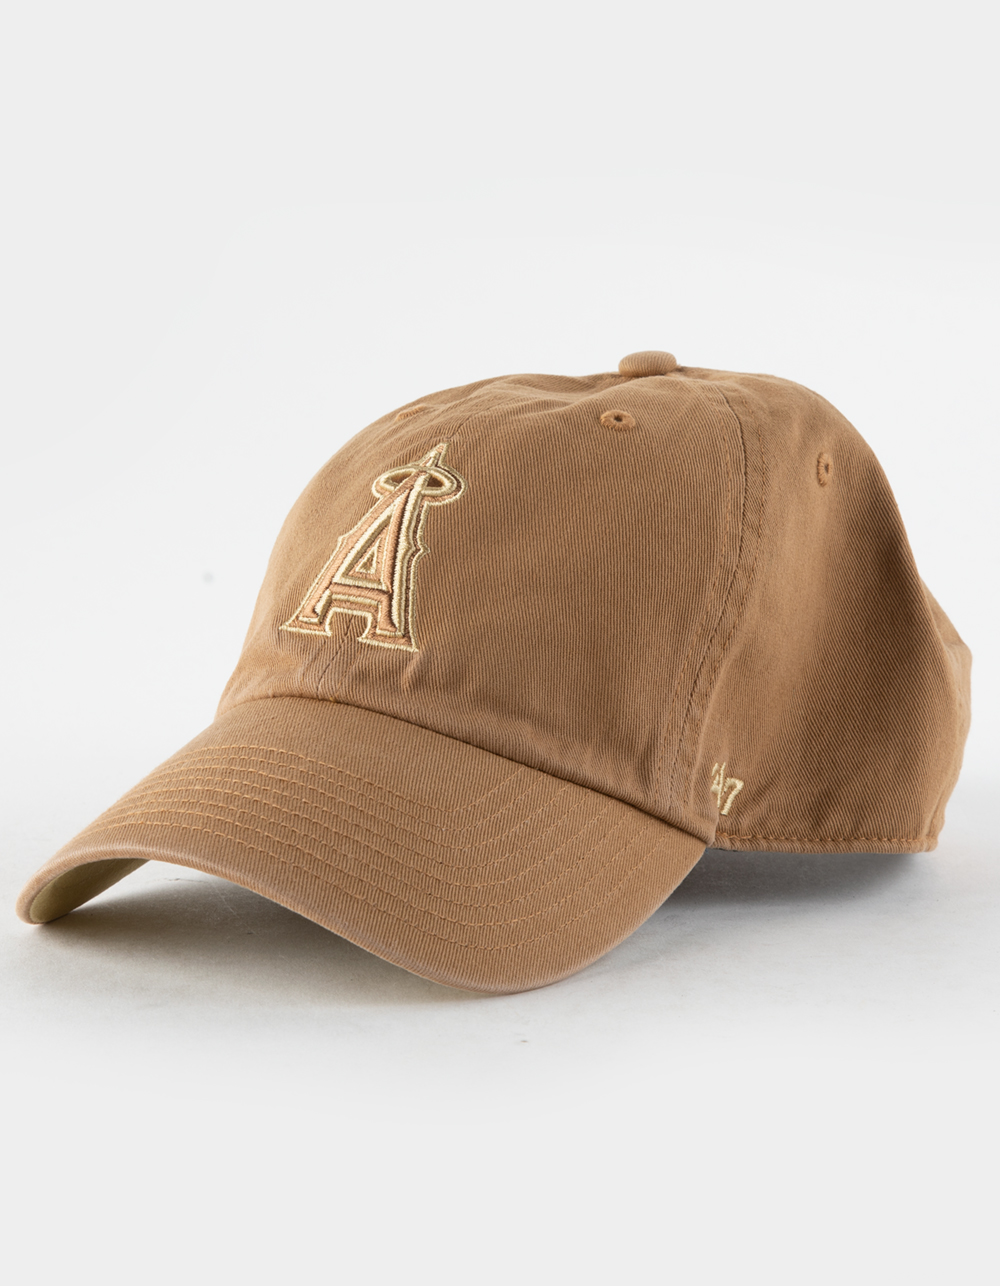 47brand Clean Up Los Angeles Angels 1971 Dad Hat. Perfect for